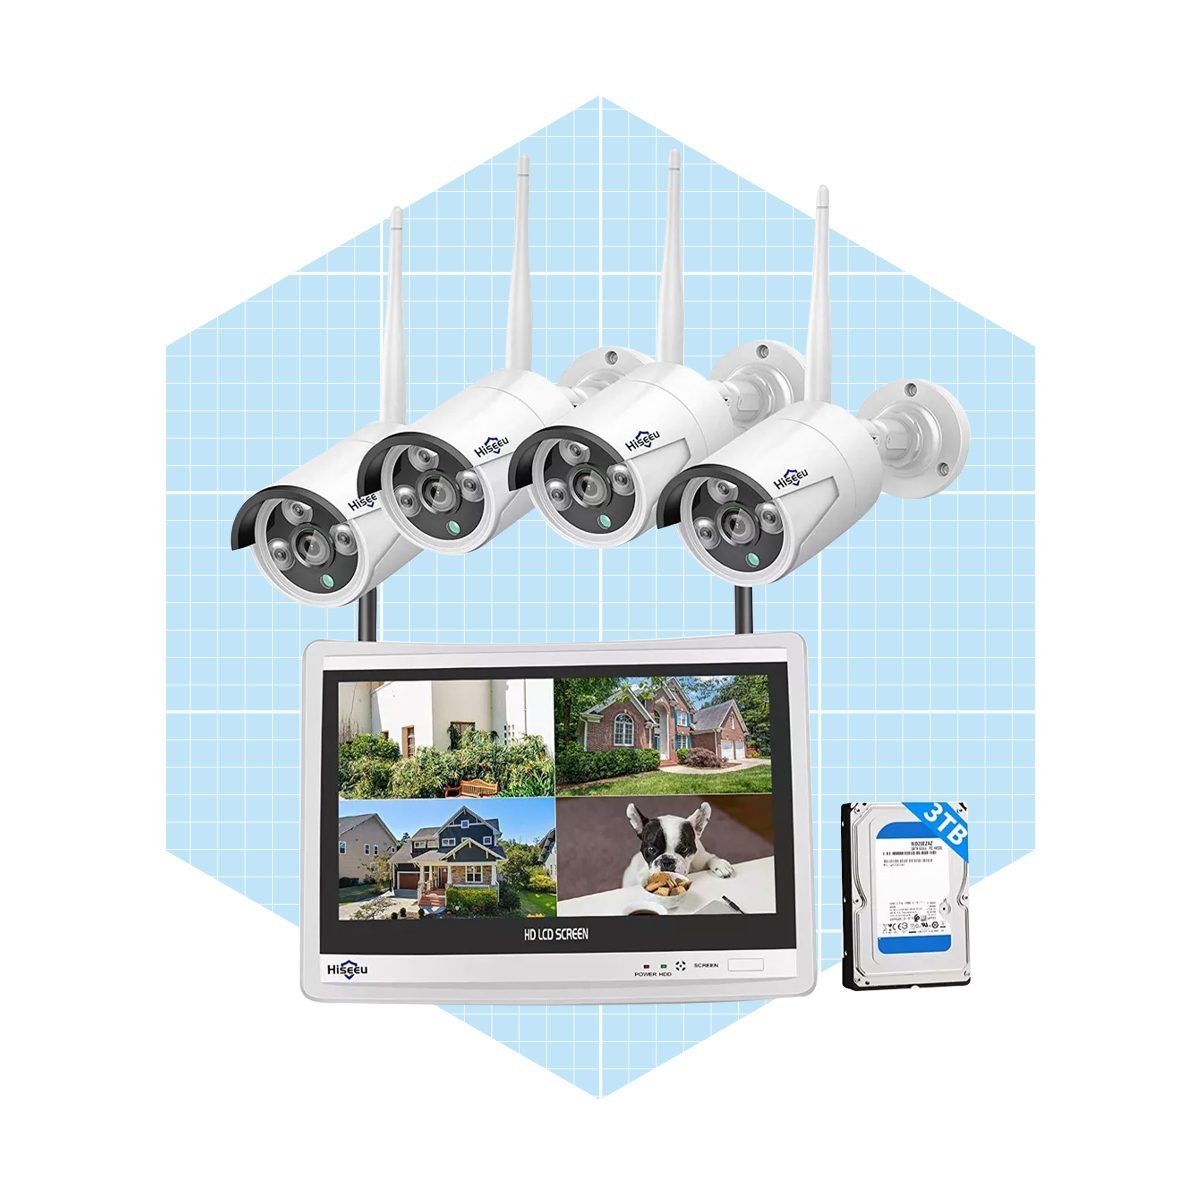 Hiseeu Wireless Wifi Indoor Outdoor Home Security System With 4 Night Vision Cameras Ecomm Target.com